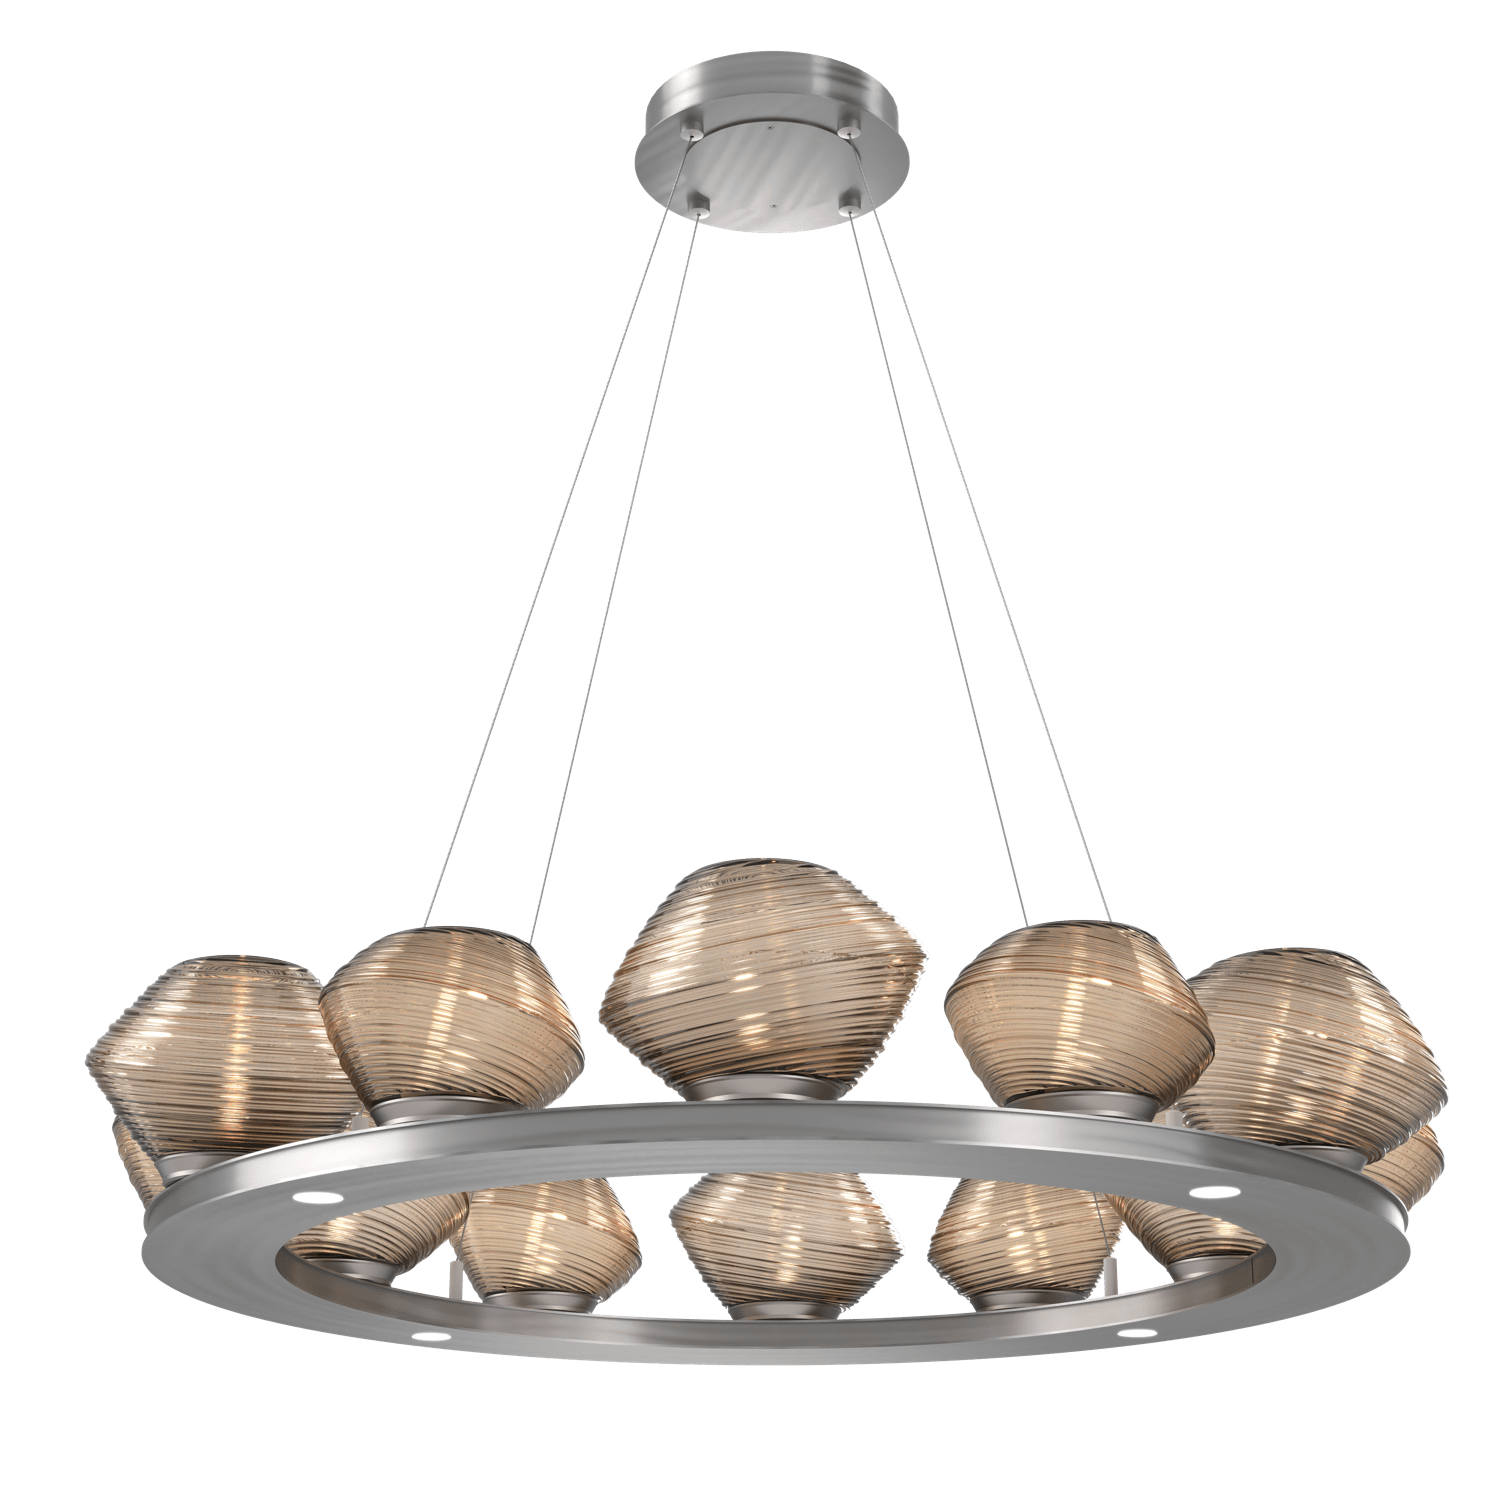 CHB0089-0C-SN-B-Hammerton-Studio-Mesa-36-inch-ring-chandelier-with-satin-nickel-finish-and-bronze-blown-glass-shades-and-LED-lamping